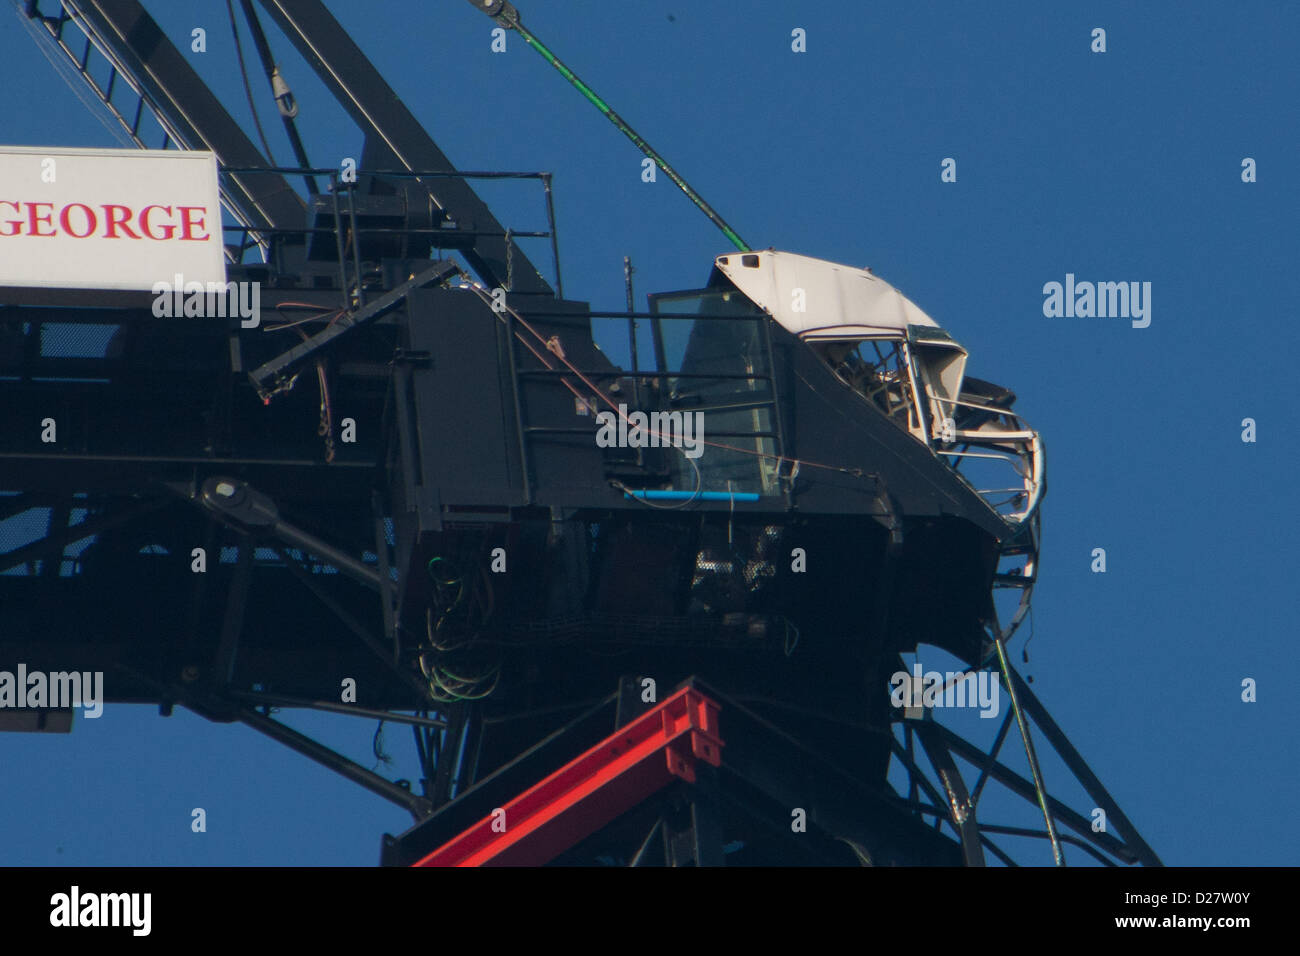 London, UK. 16th January 2013. Damaged cab on crane on St George's Wharf tower that an Agusta 109 helicopter had collided with in Wandsworth Road in Vauxhall, London, 16th January 2013. Credit:  martyn wheatley / Alamy Live News Stock Photo